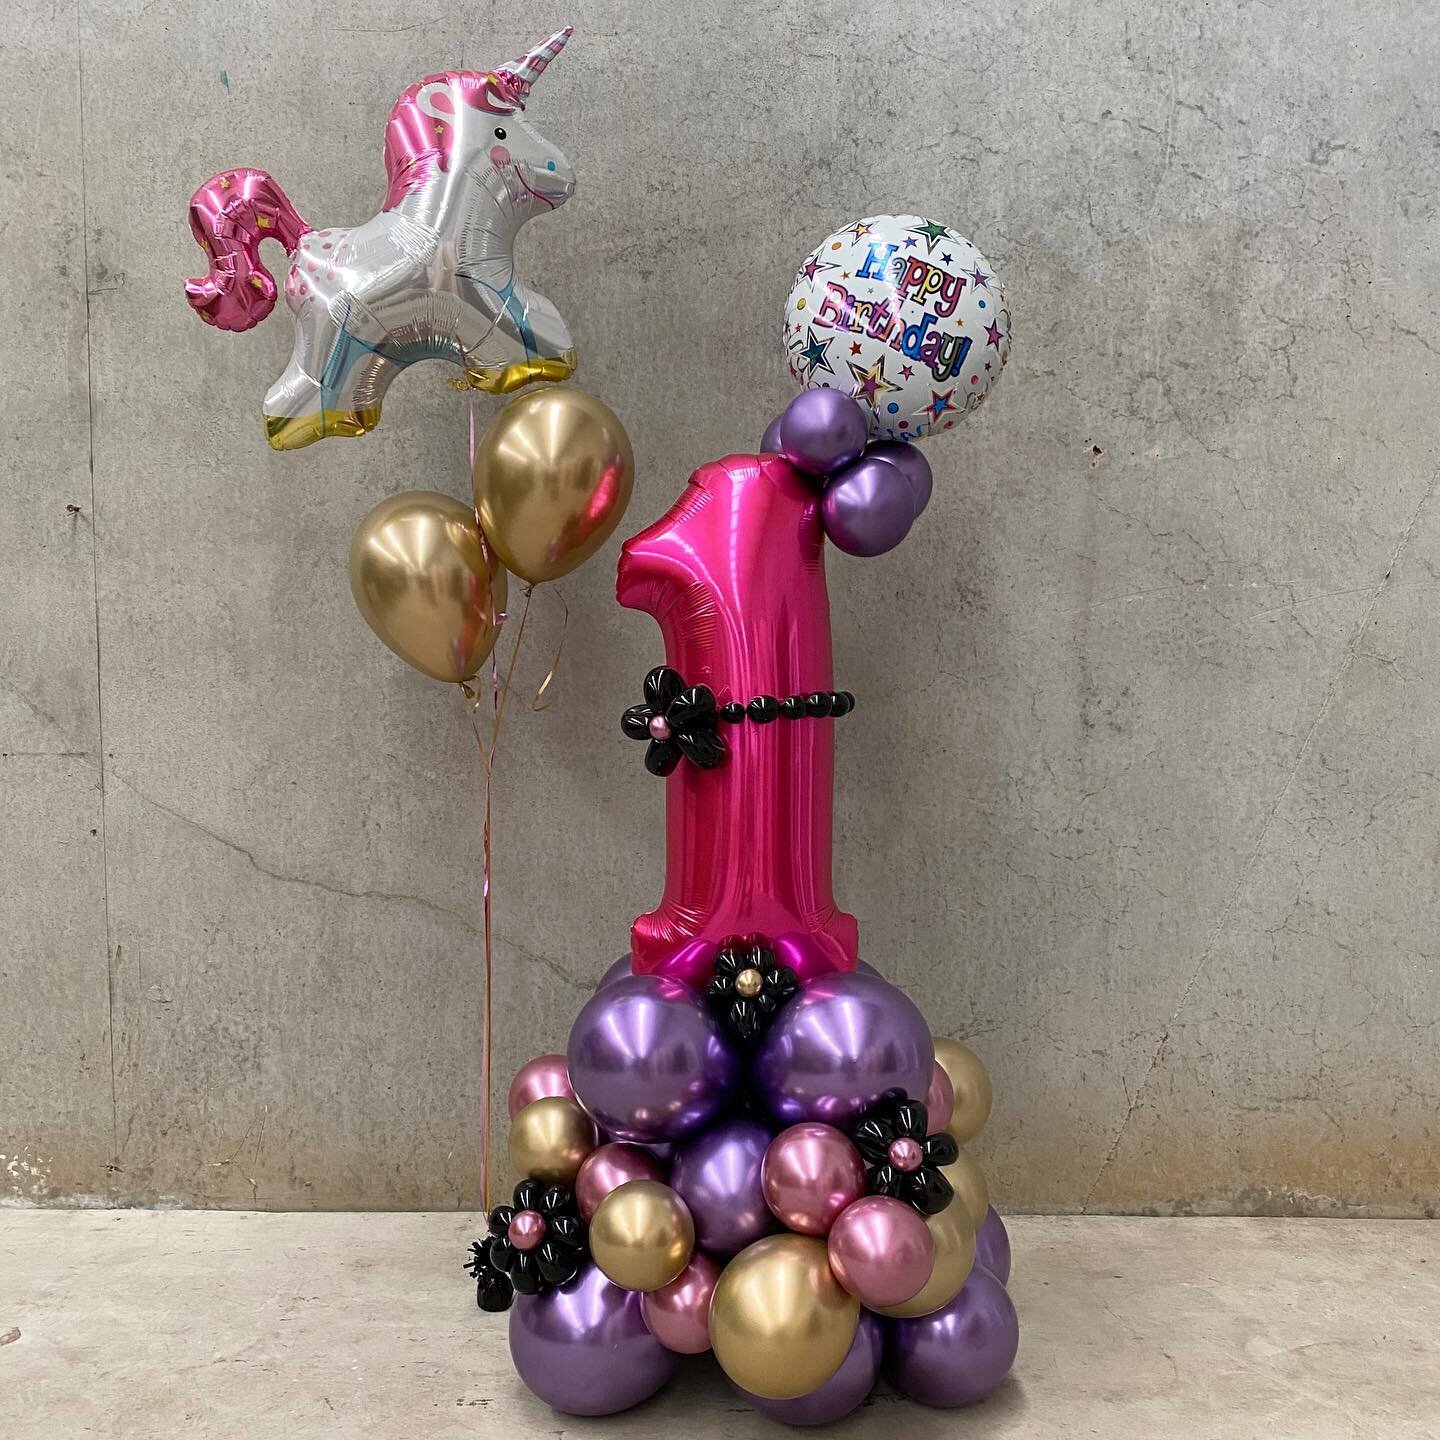 A funky, bright 1st birthday arrangement for a special little girl celebrating in Isolation.

Free contactless delivery within 25km of Tullamarine when you spend over $100.

For more information on our balloon arrangements please email us at info@one